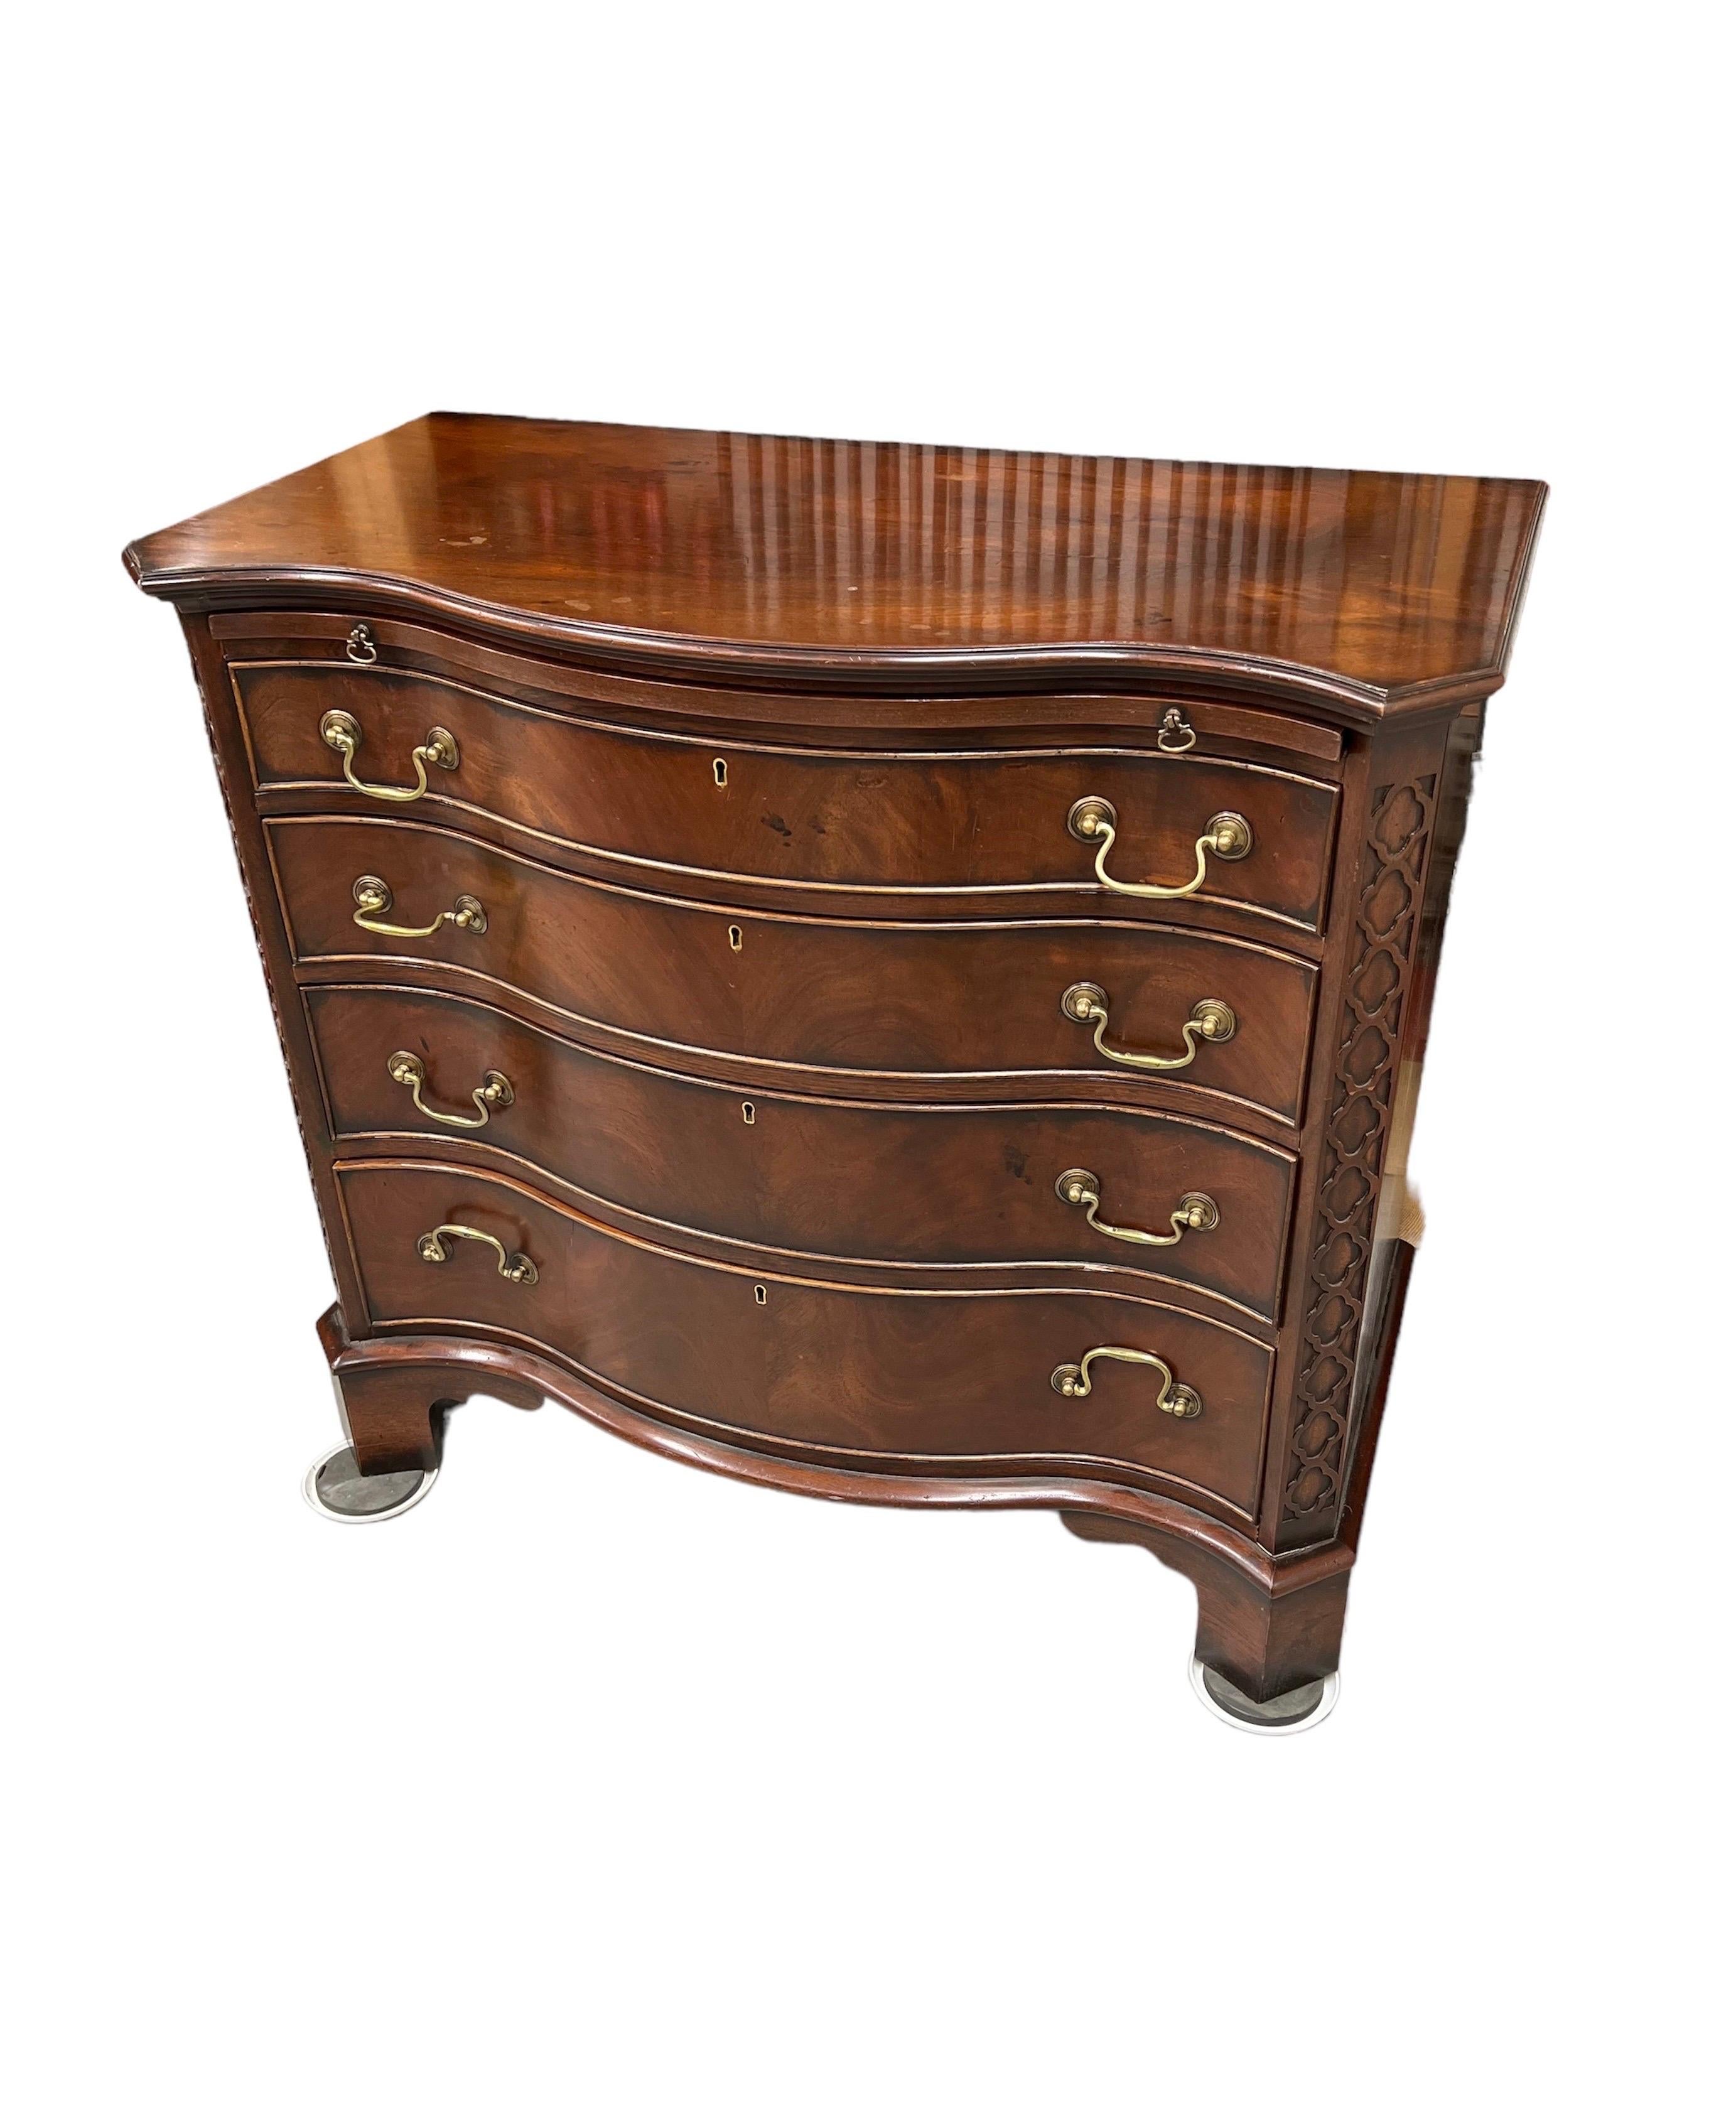 George III Style Serpentine Mahogany Chest of Drawers 
With 5 drawers in graduated sizes also with draw out brushing slide 

From KEITH SKEEL LOUDHAM HALL COLLECTION This lovely 
Mahogany Chest of drawers is a great classic option.